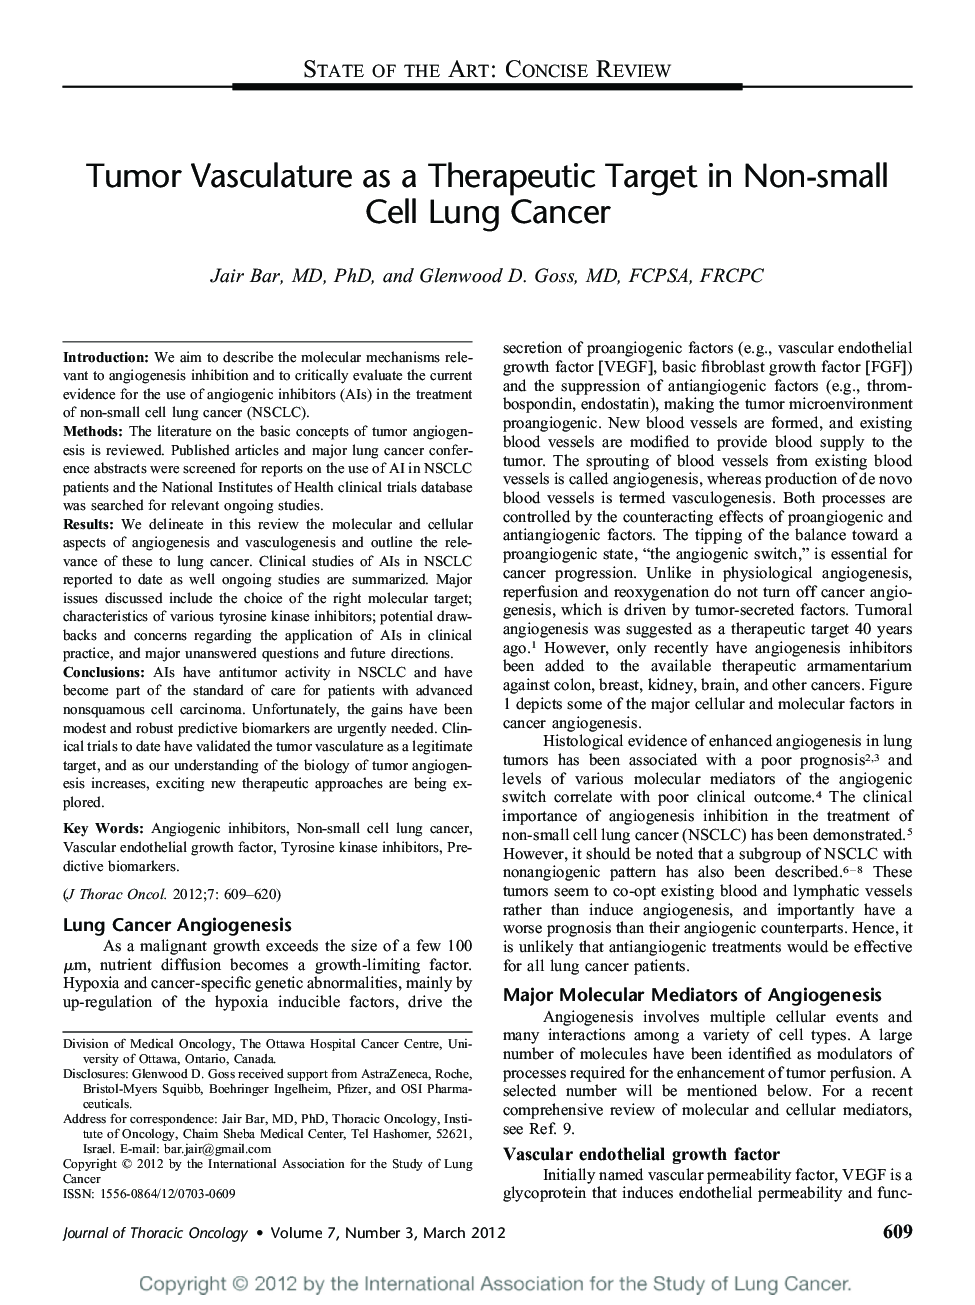 Tumor Vasculature as a Therapeutic Target in Non-small Cell Lung Cancer 